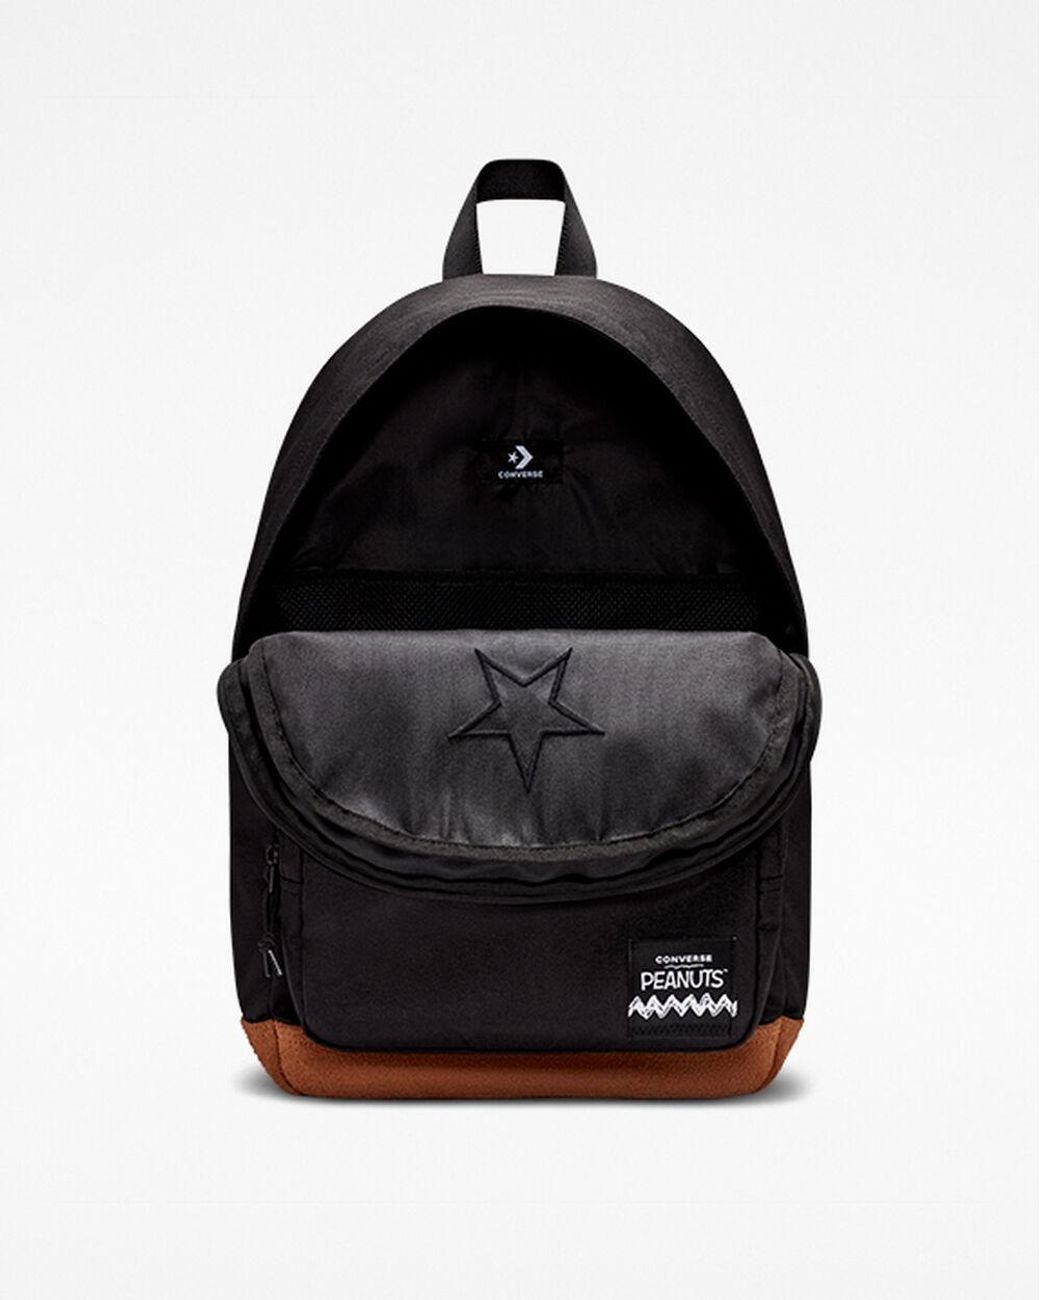 Converse X Peanuts Go 2 Backpack in Black | Lyst UK